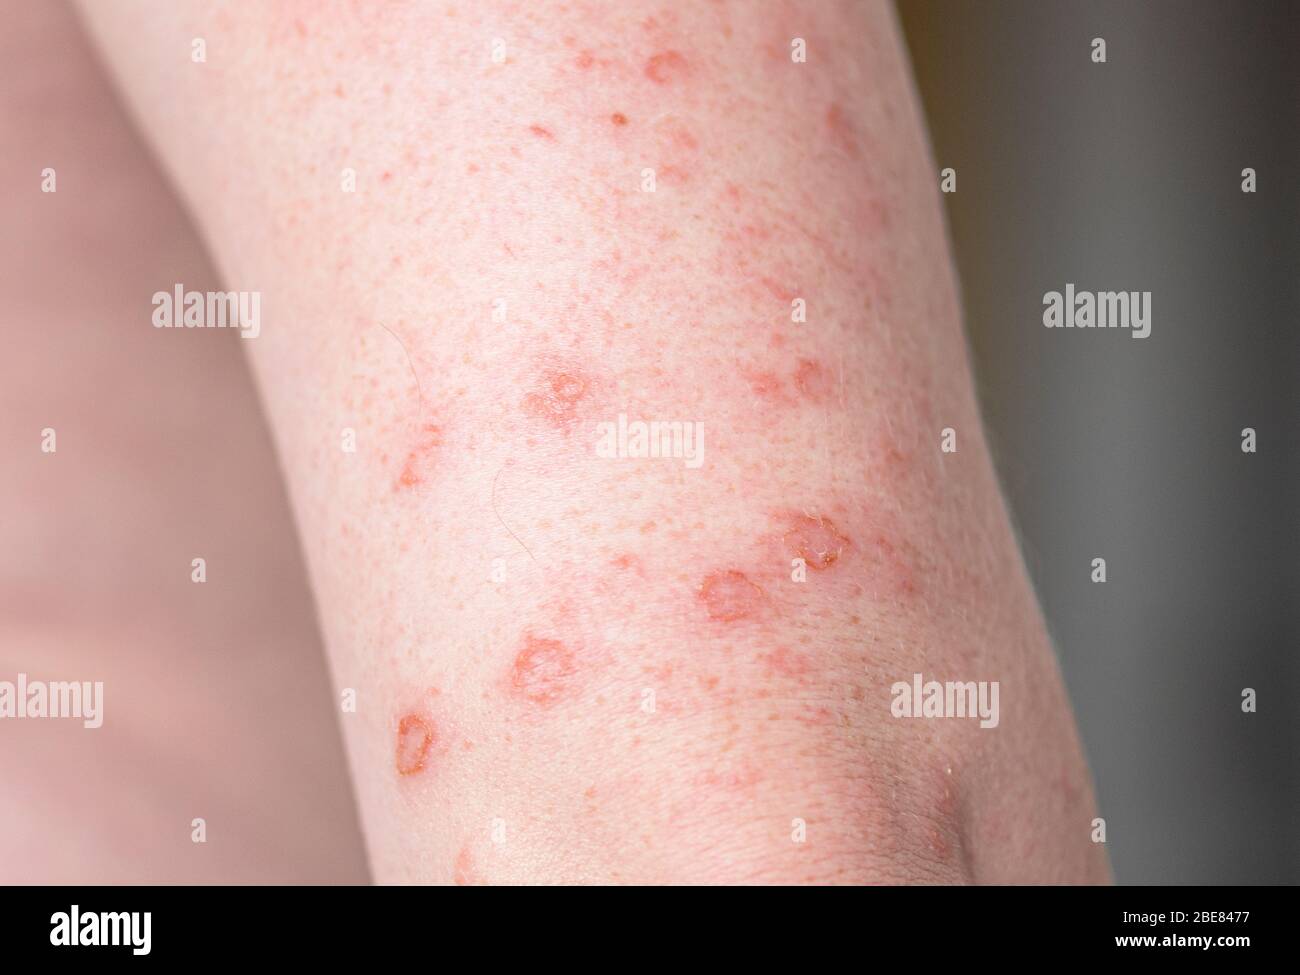 Close-up body with allergic rash, eczema on hands, skin with red bumps and blisters Stock Photo